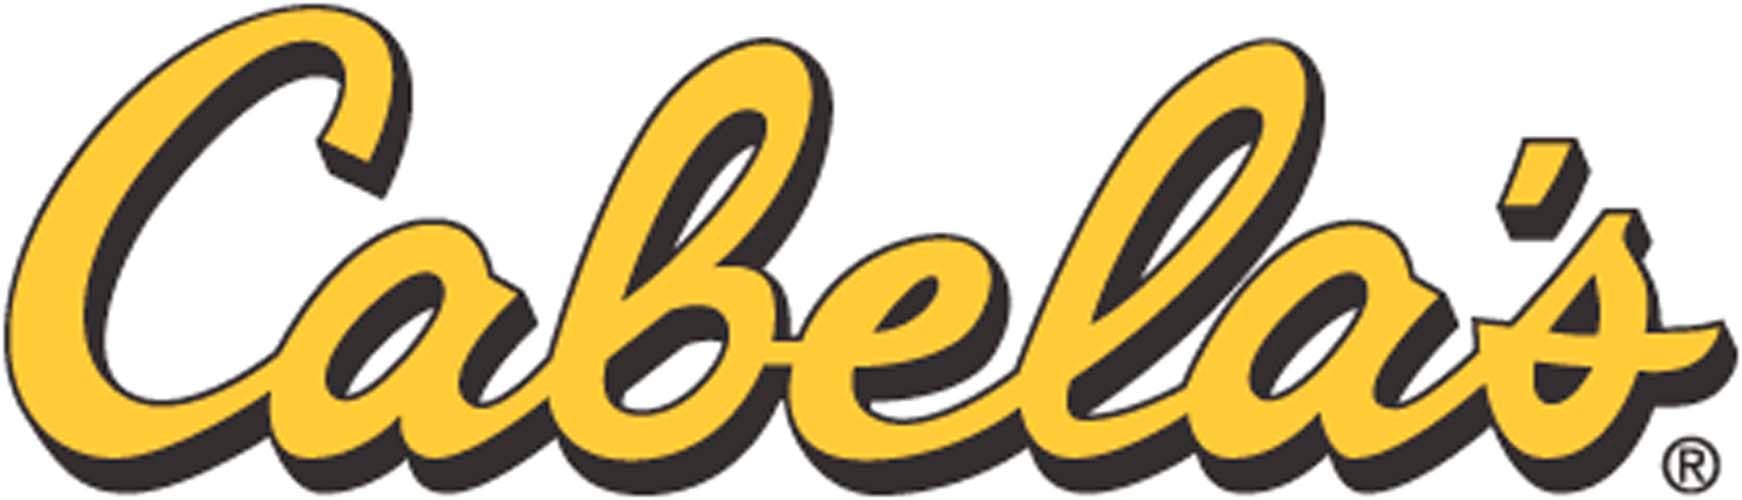 Cabela's announces opening date for Charleston, WV store - WOWK 13